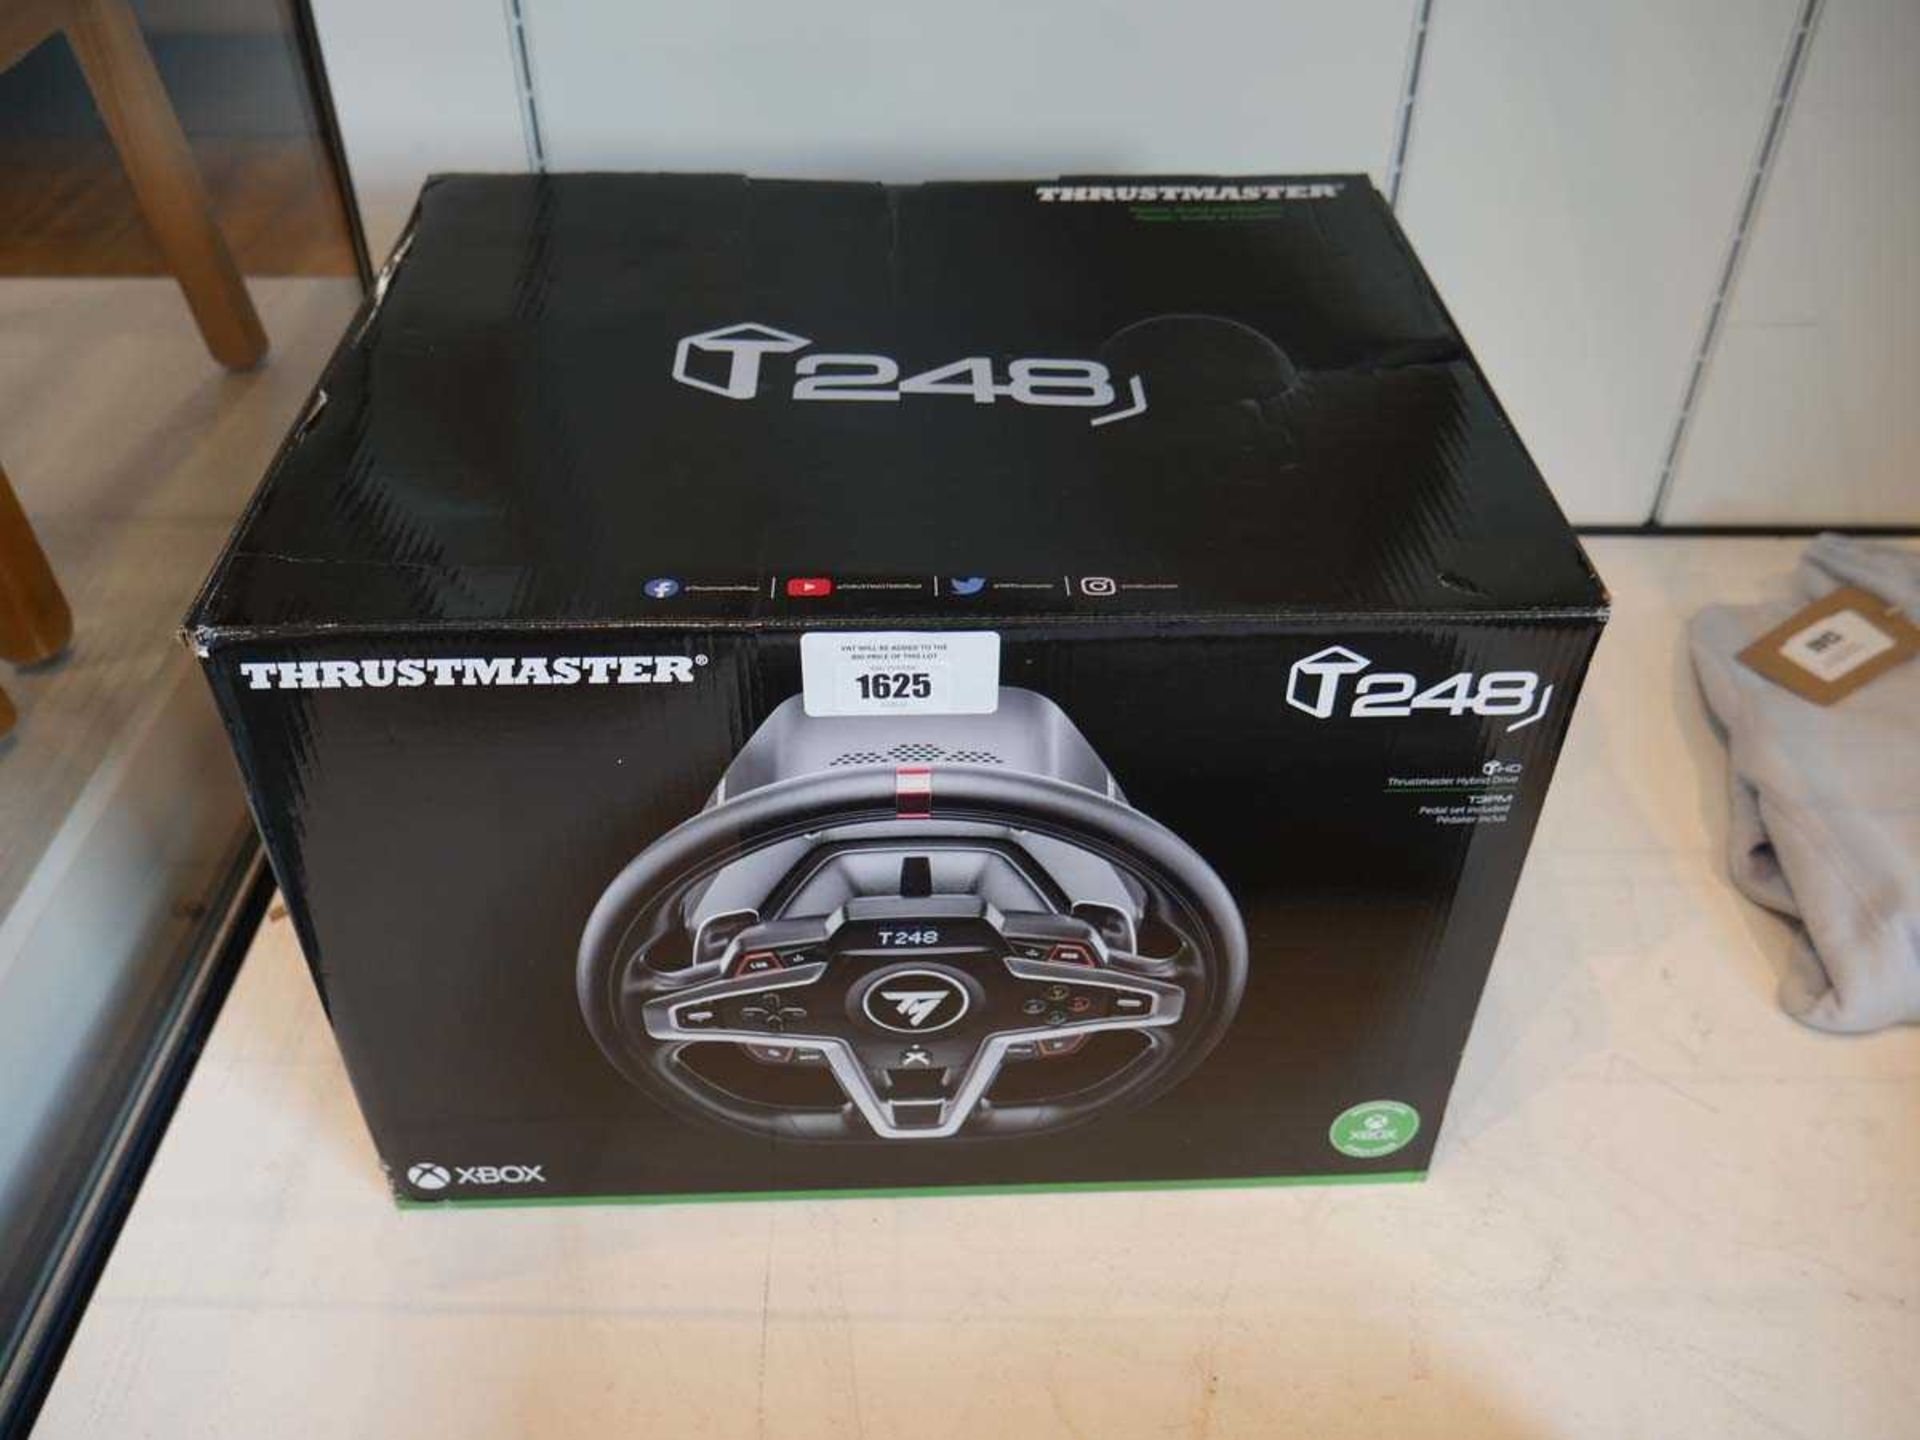 +VAT Thrustmaster T248 racing wheel and pedal set for XBox